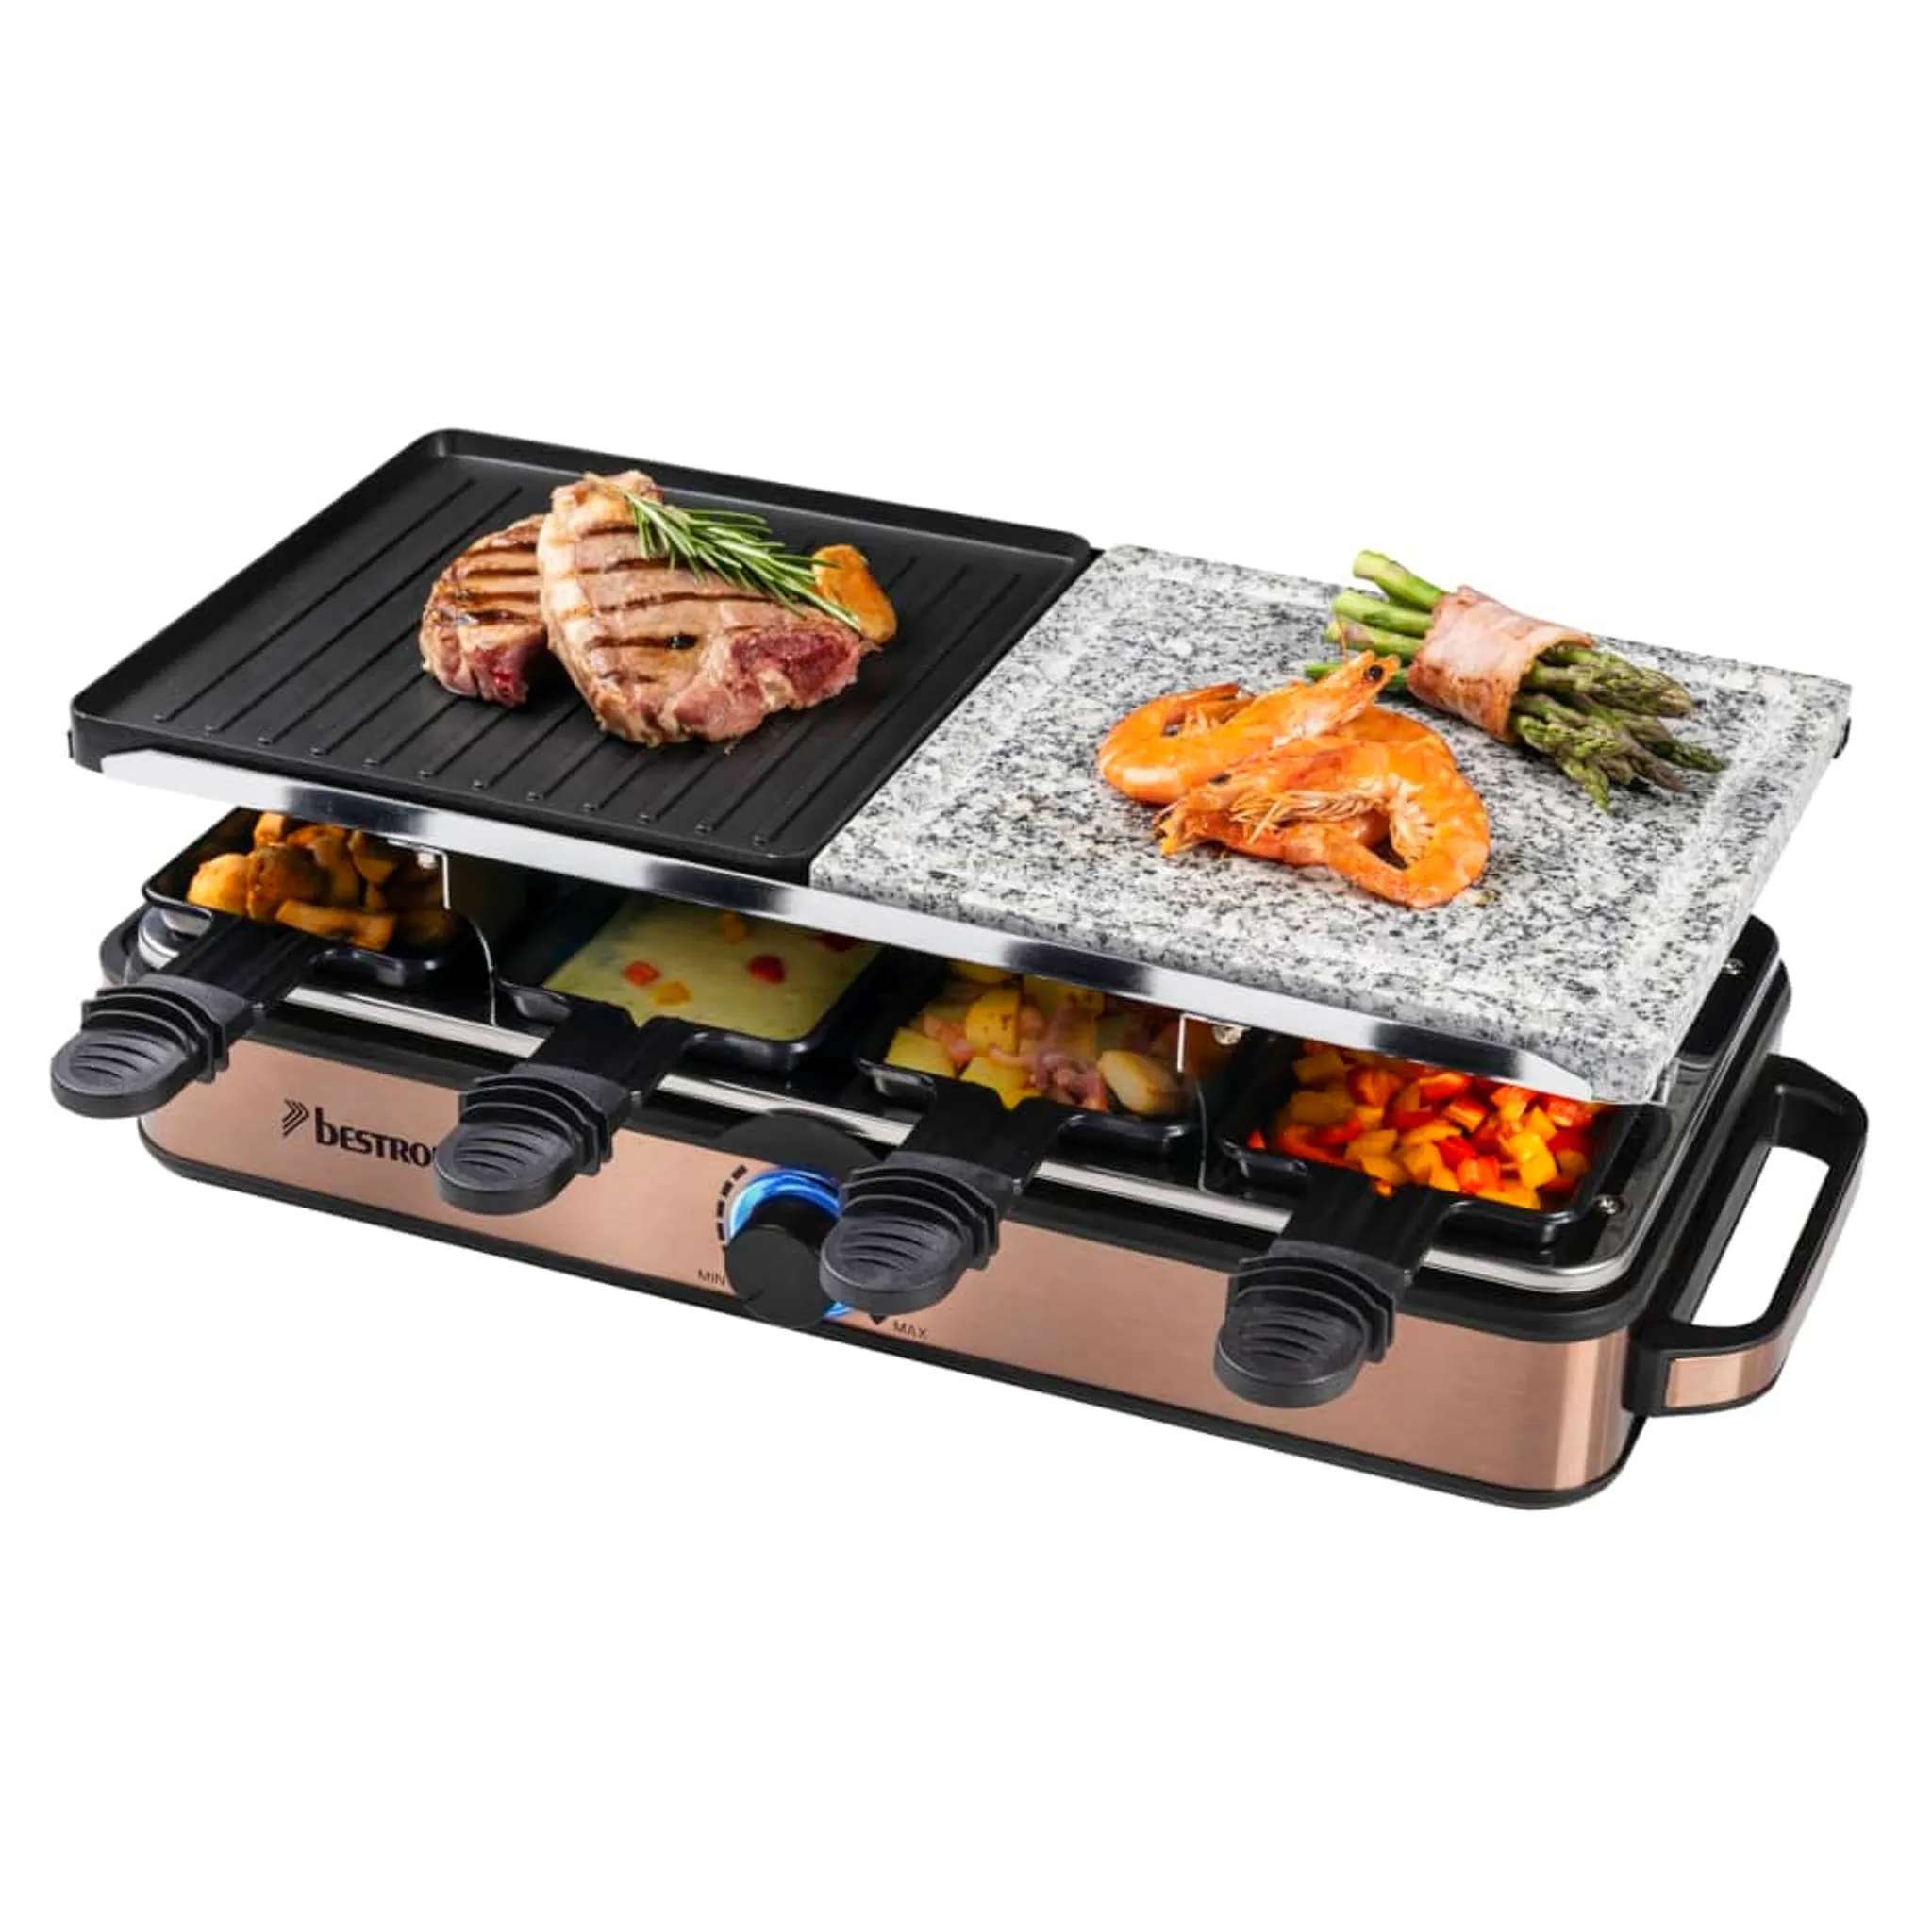 Bestron 2-in-1 Raclette-Partygrill